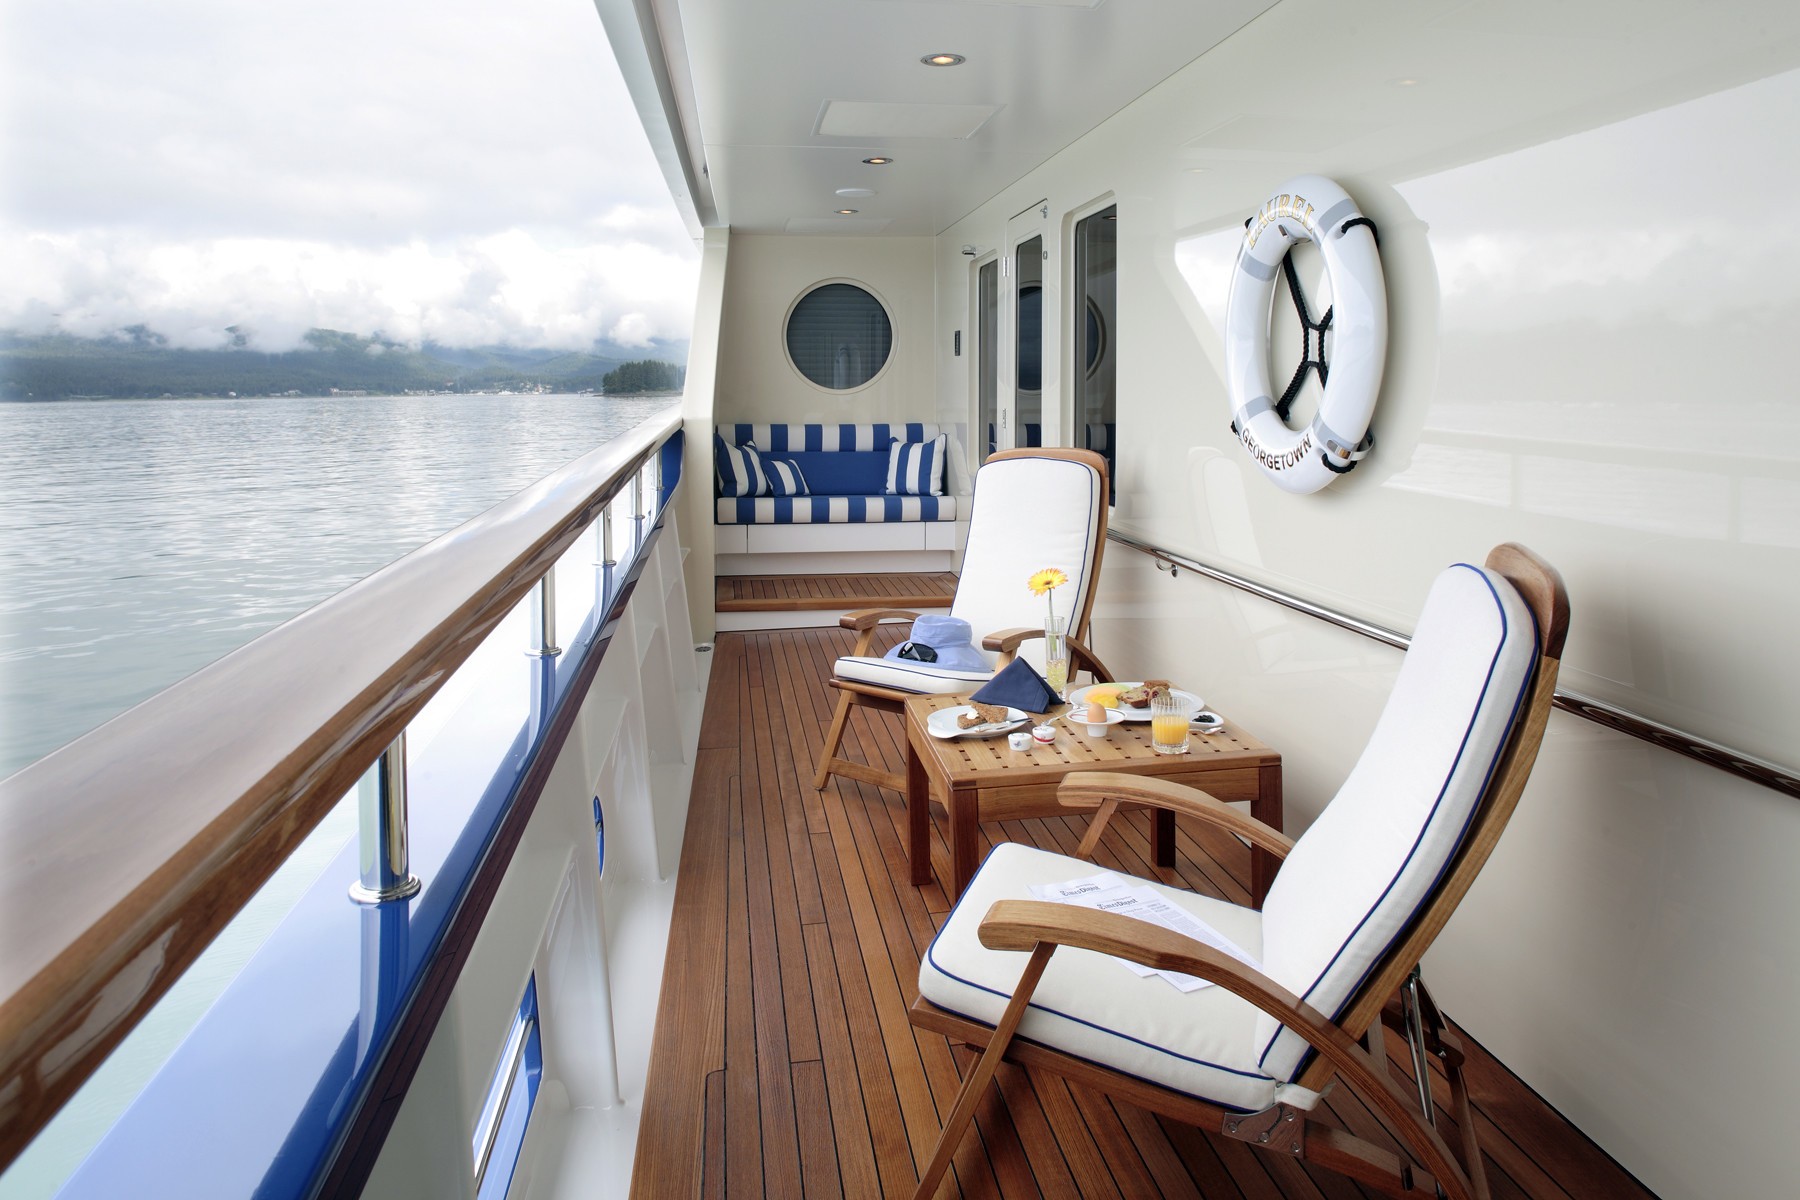 starboard side deck seating area